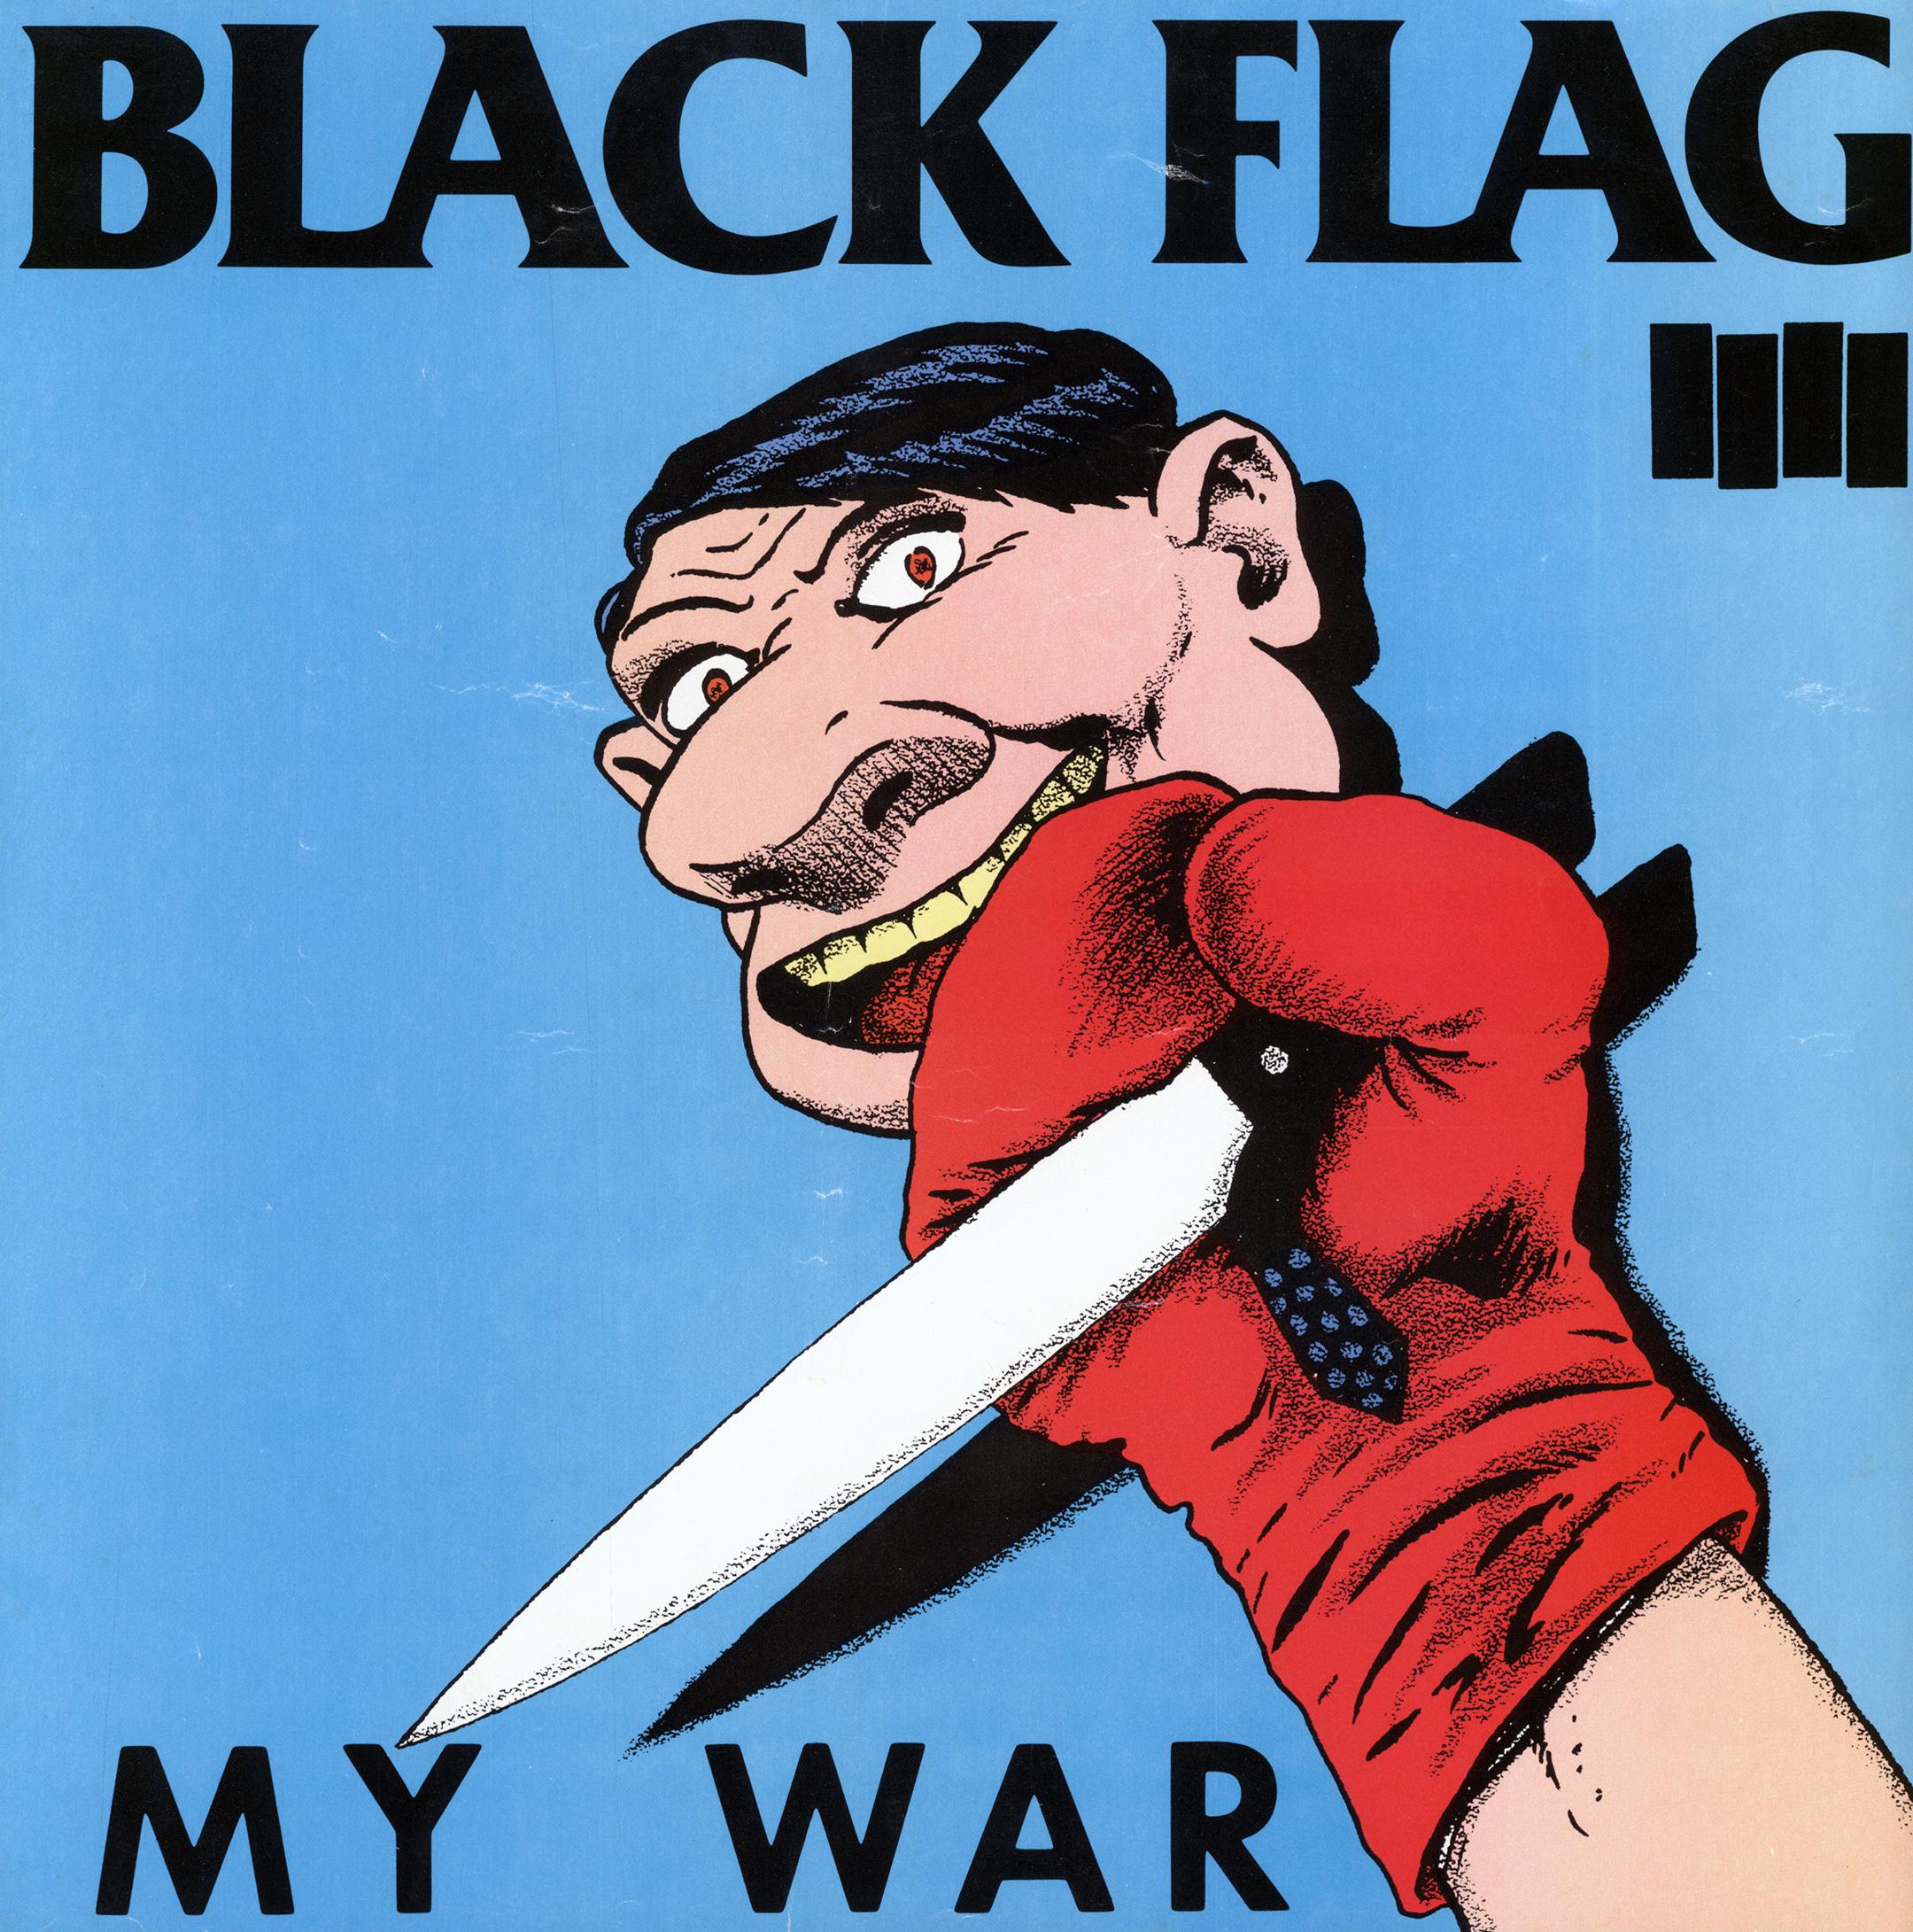 Raymond Pettibon Black Flag 1984: 
Rare early 1980's Black Flag promotional poster illustrated by Raymond Pettibon for the seminal Black Flag record: My War. A striking, historic 1980s Raymond Pettibon Black Flag poster sure to standout in any